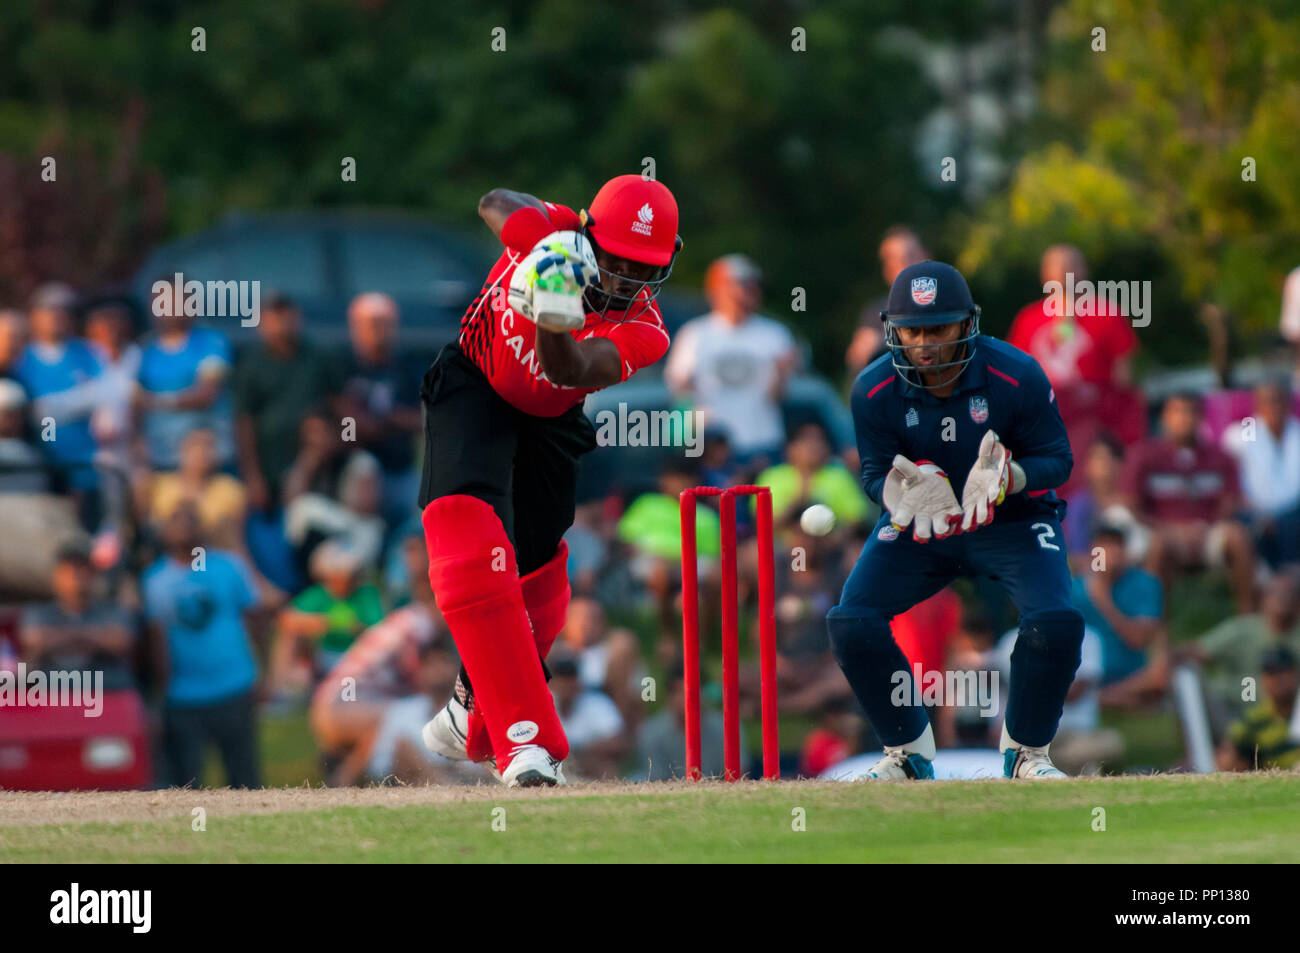 Morrisville, North Carolina, USA. 22nd Sep, 2018. Sept. 22, 2018 - Morrisville N.C., USA - Team Canada ROGRIGO AUSTINE THOMAS (46) in bat with Team USA MOHAMMED KHALEEL (2) as the wicketkeeper during the ICC World T20 America's ''A'' Qualifier cricket match between USA and Canada. Both teams played to a 140/8 tie with Canada winning the Super Over for the overall win. In addition to USA and Canada, the ICC World T20 America's ''A'' Qualifier also features Belize and Panama in the six-day tournament that ends Sept. 26. Credit: Timothy L. Hale/ZUMA Wire/Alamy Live News Stock Photo